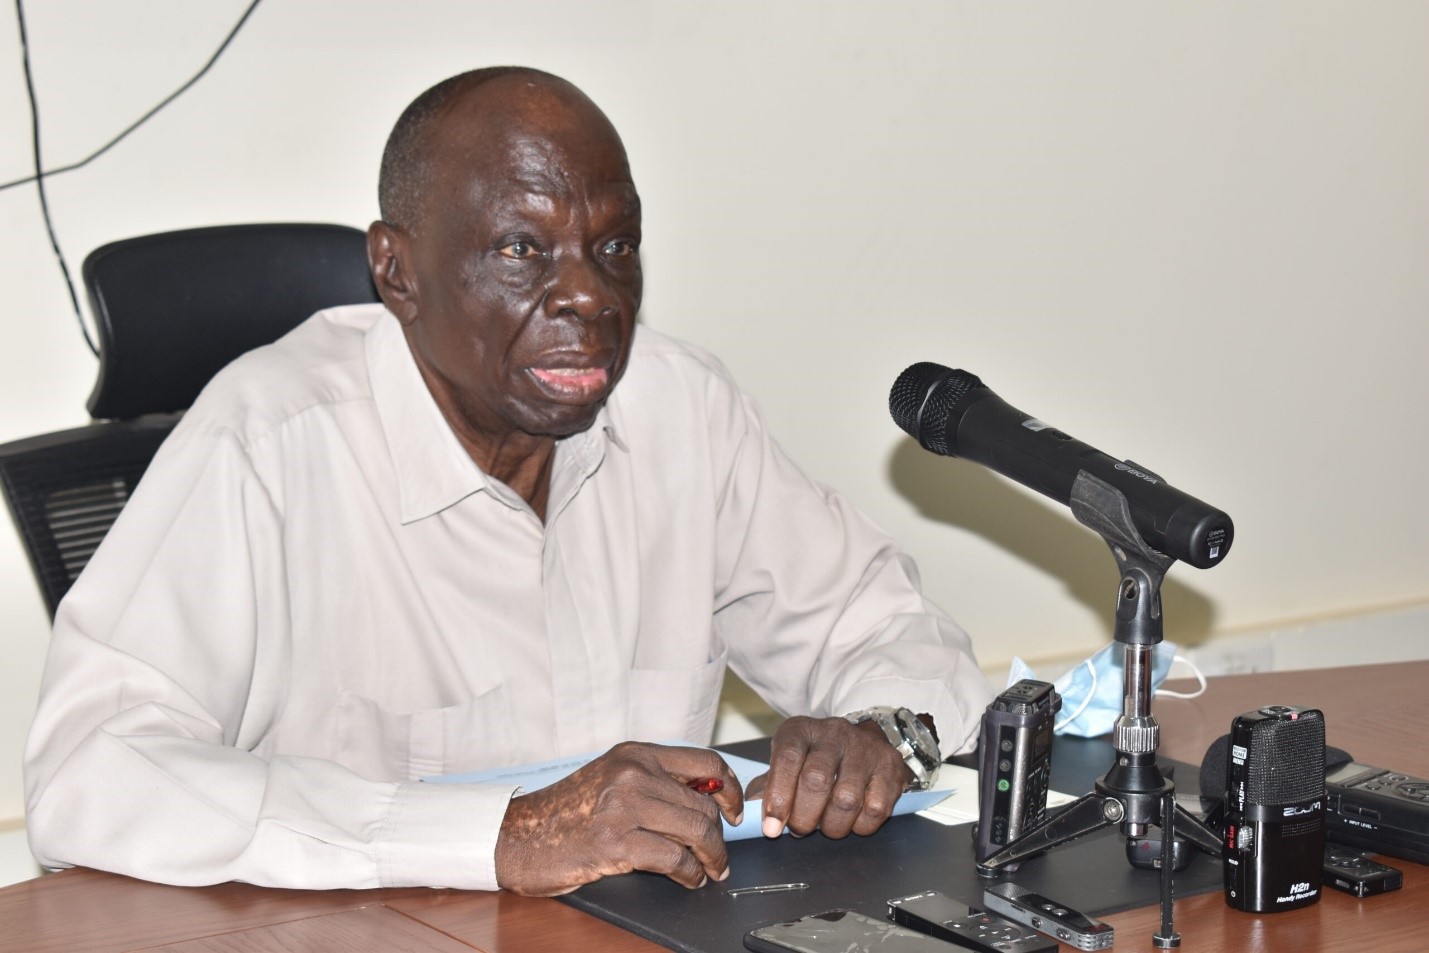 24 candidates miss exams in Jonglei State